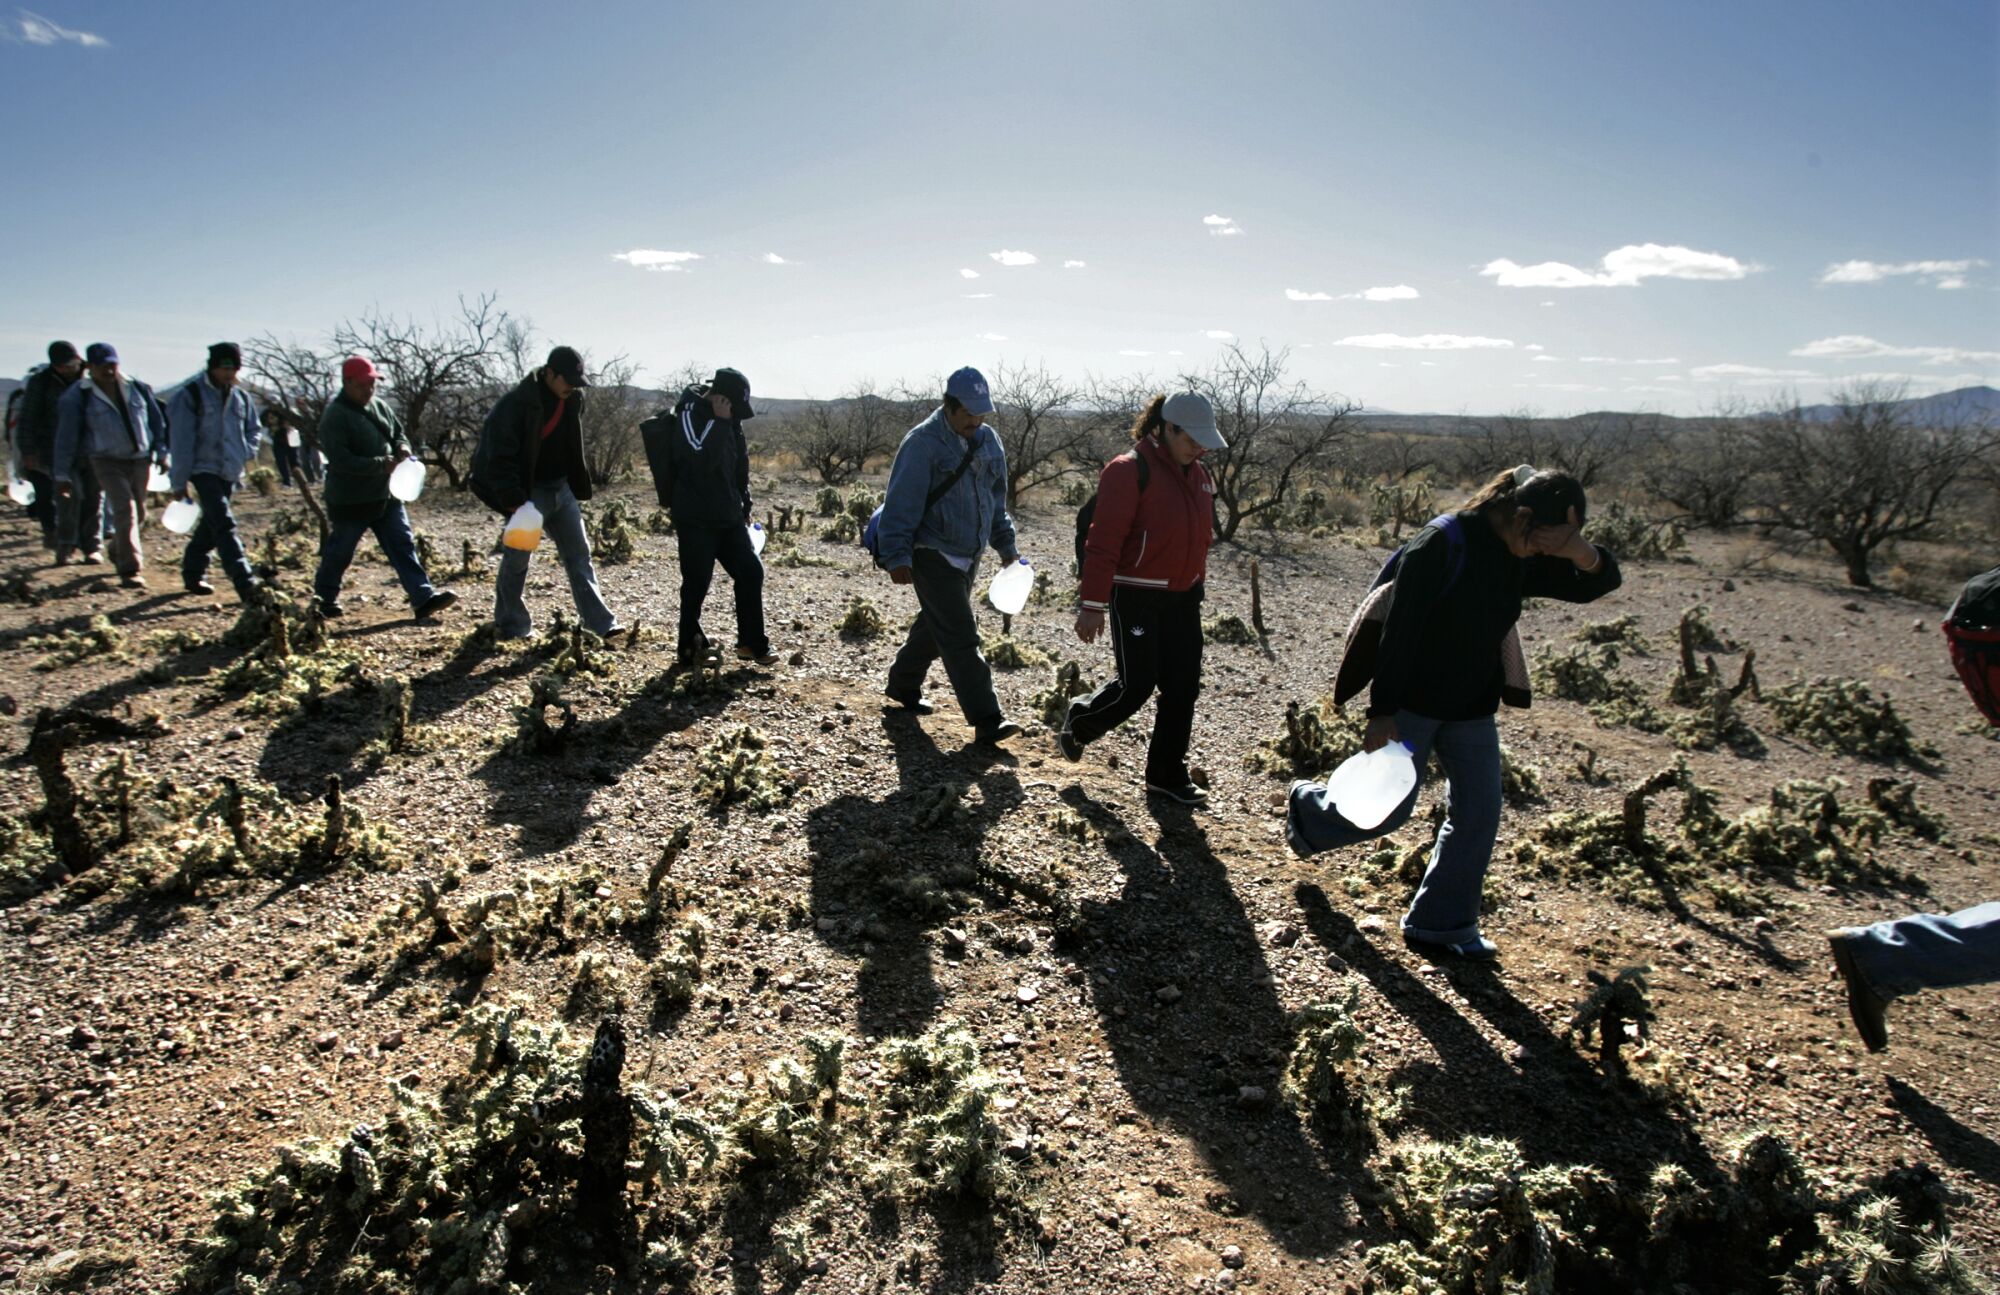 Lugging gallon jugs of water, migrants thread their way along footpaths just north of the Mexico-Arizona border. 